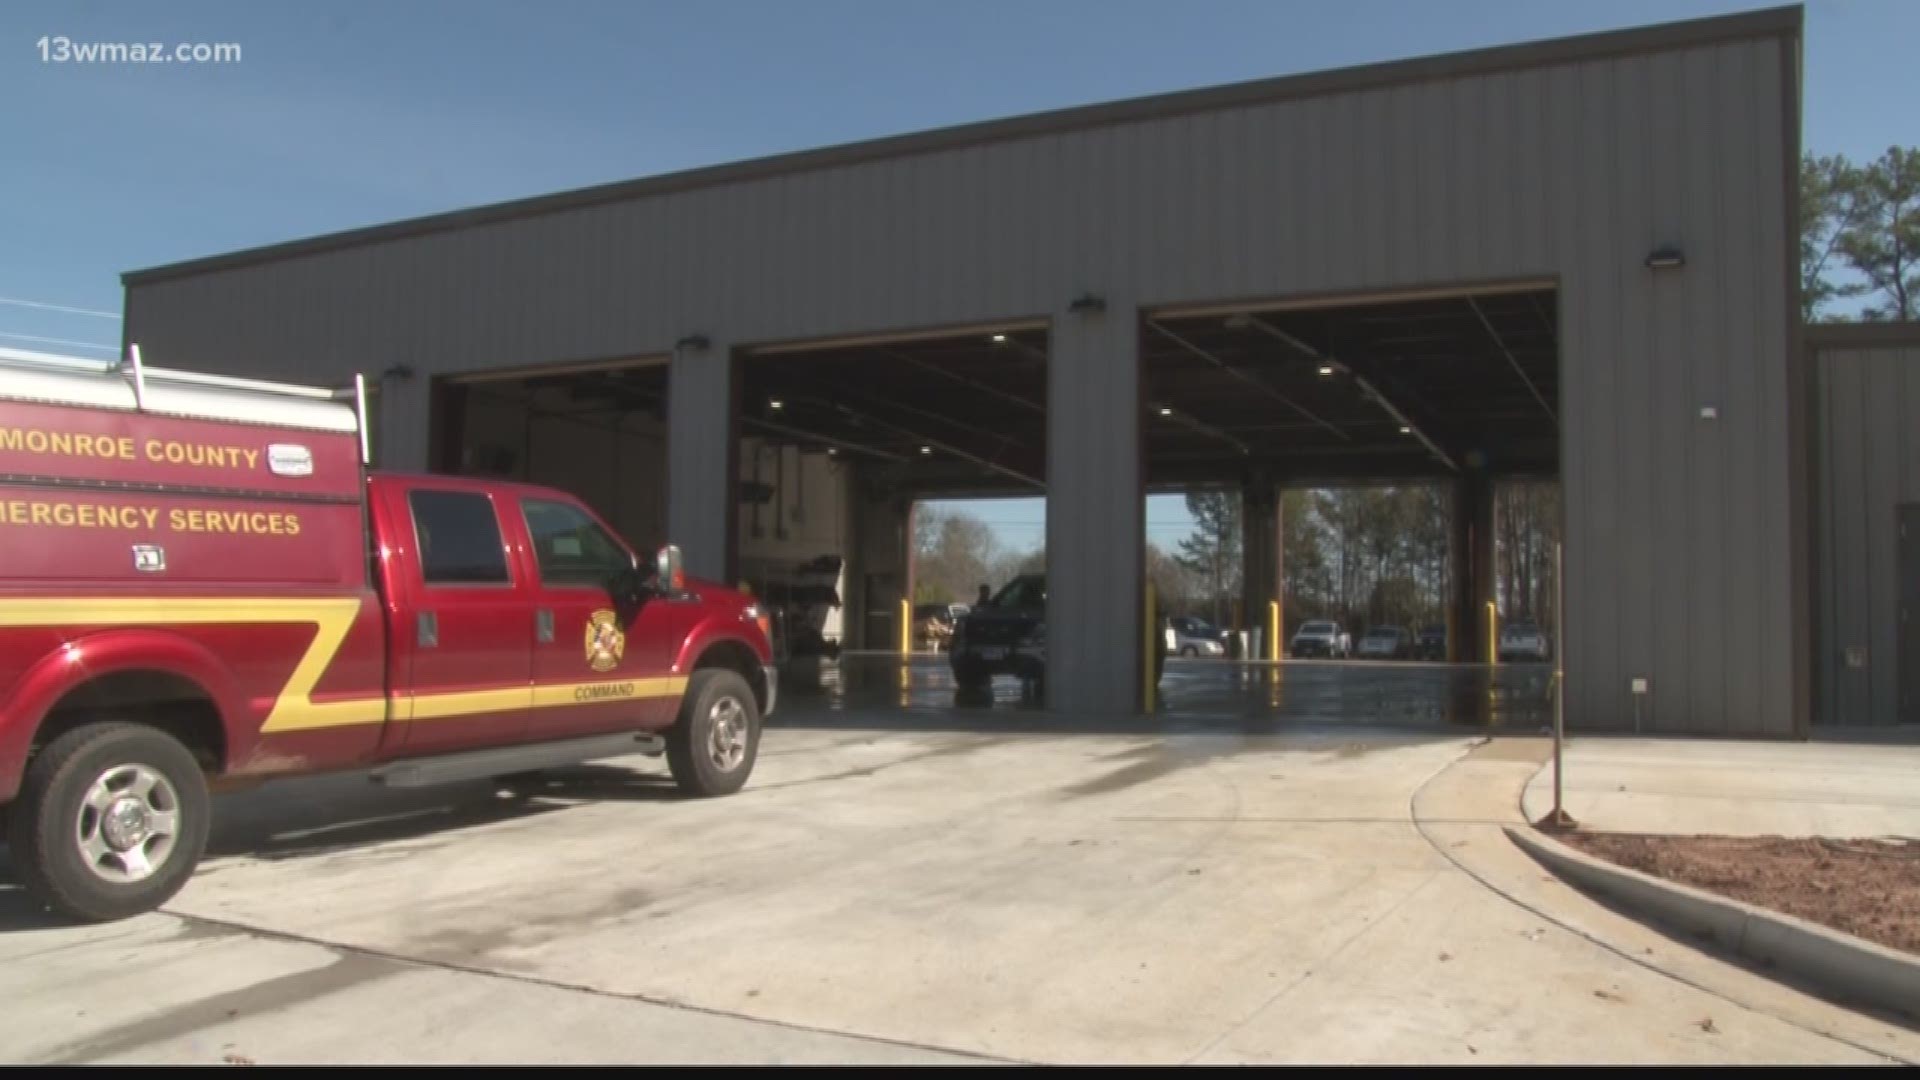 Monroe firefighters and paramedics now have a new place to respond to county emergencies.